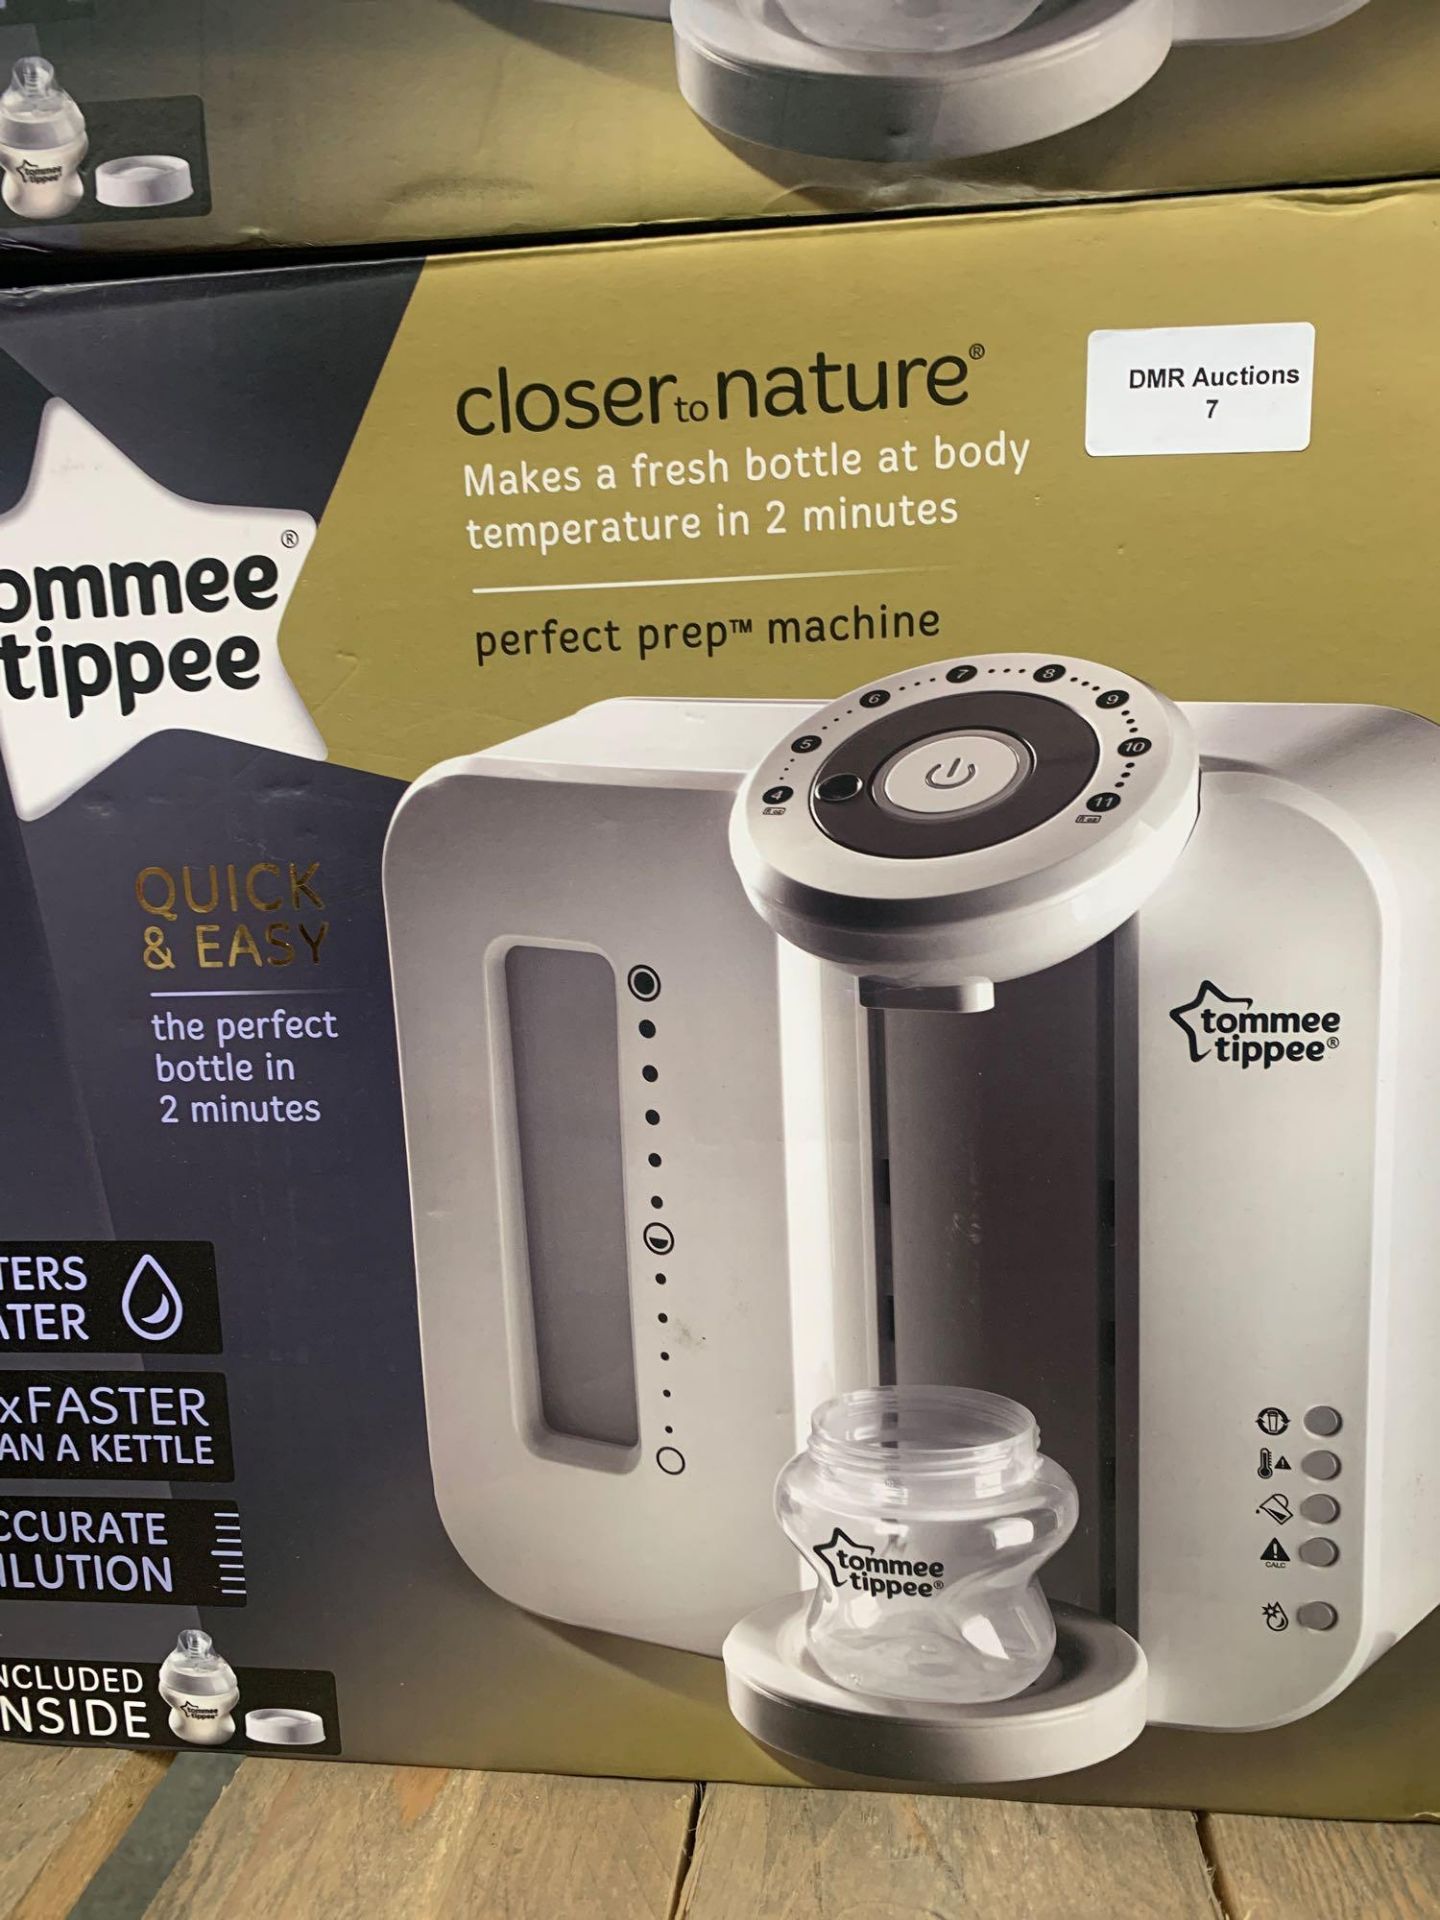 1 LOT TO CONTAIN 1 TOMMEE TIPPEE CLOSE TO NATURE PERFECT PREP MACHINE / RRP £80.00 (THIS ITEM IS